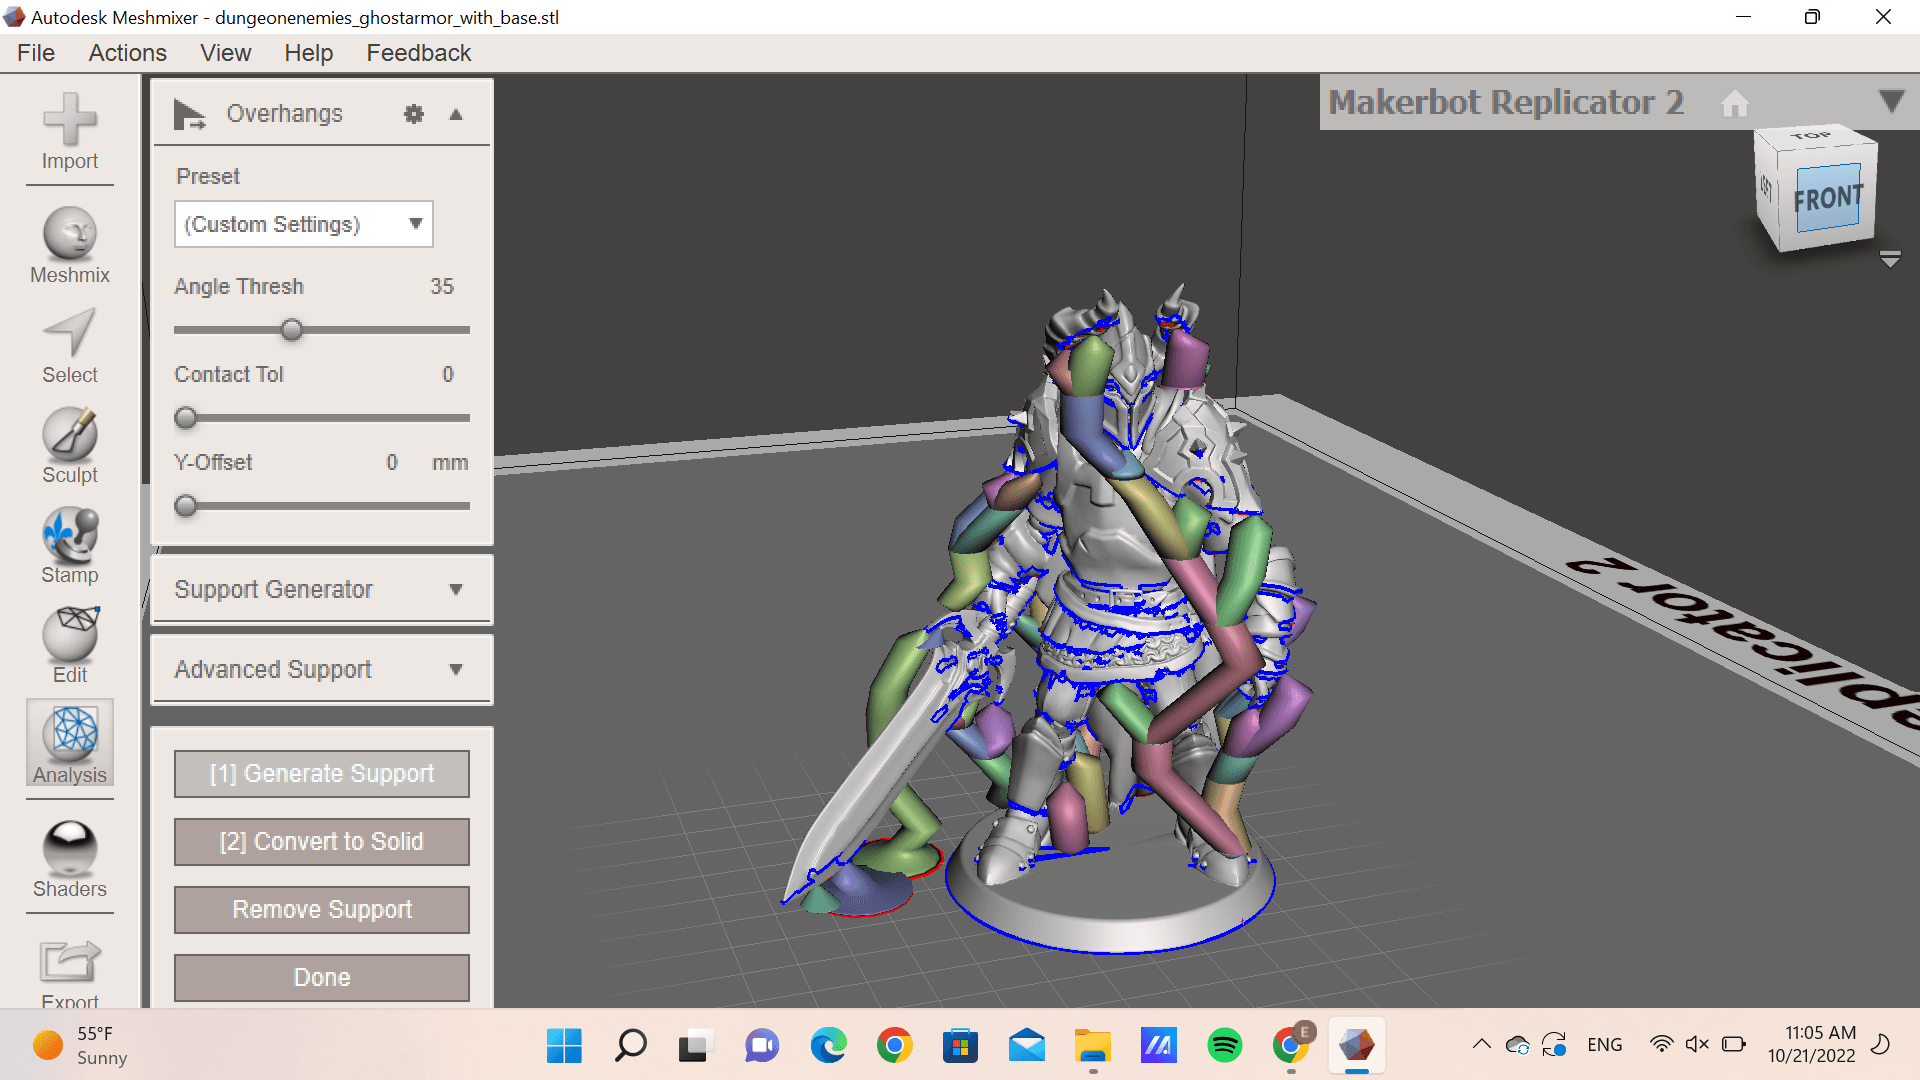 dungeonenemies_ghostarmor_with_base.stl 3d model